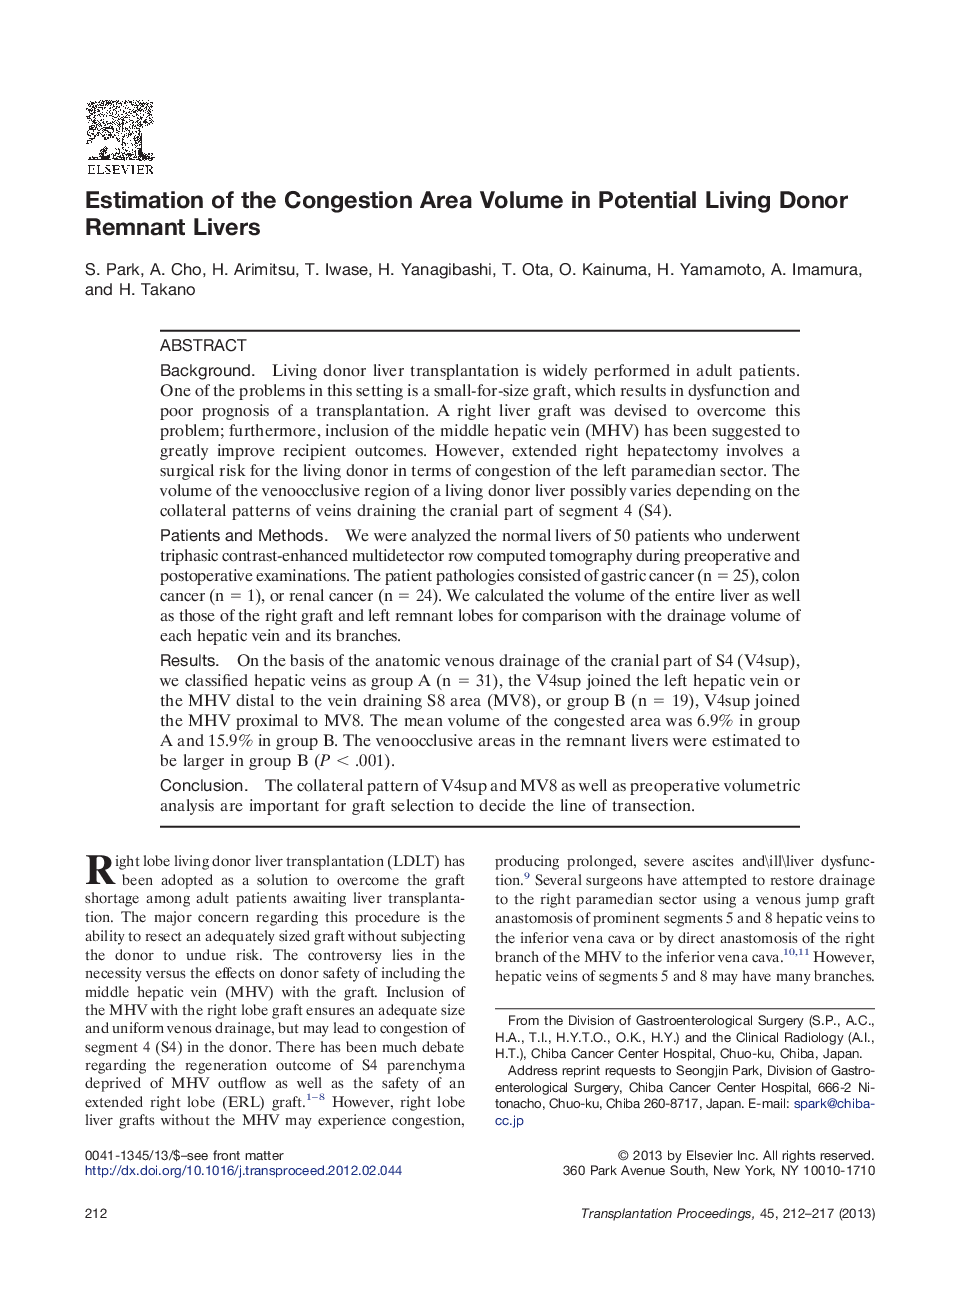 Estimation of the Congestion Area Volume in Potential Living Donor Remnant Livers